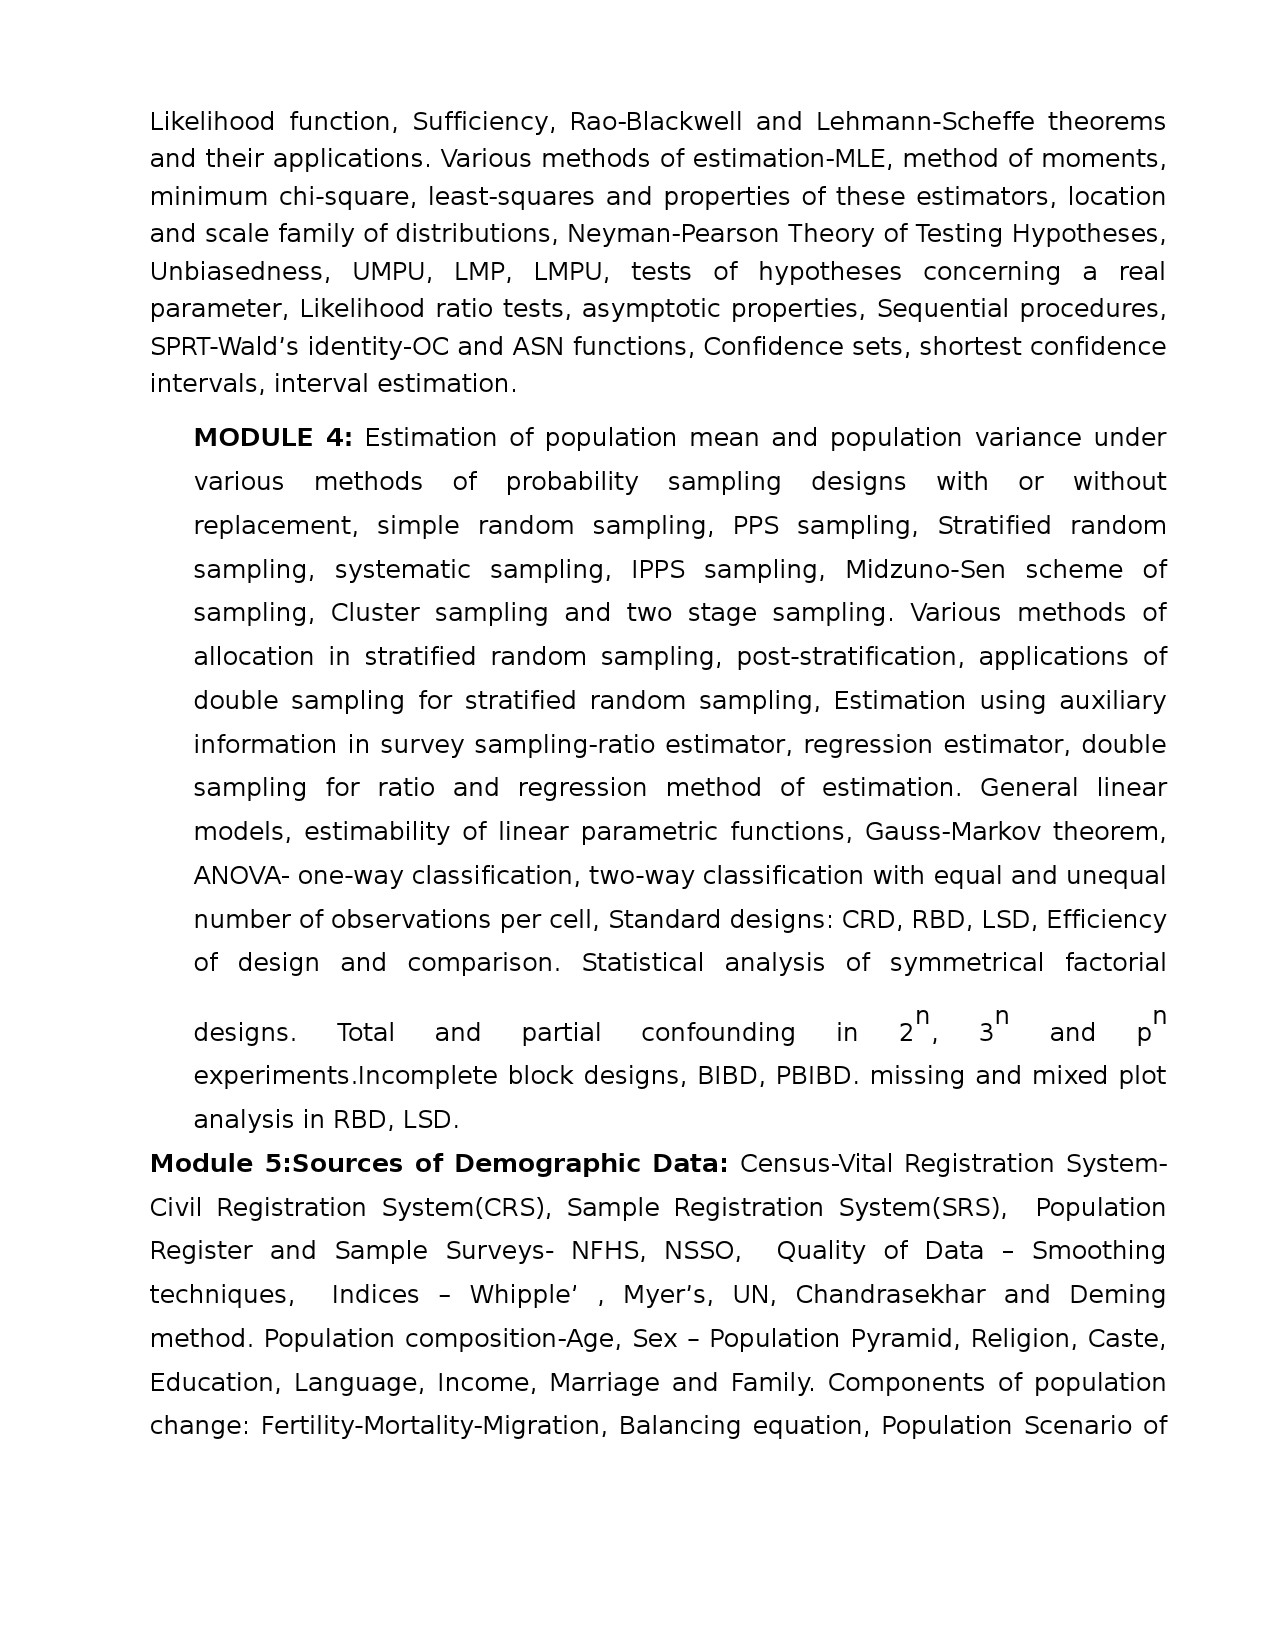 Lecturer In Statistics And Demography KPSC Exam Syllabus May 2021 - Notification Image 2